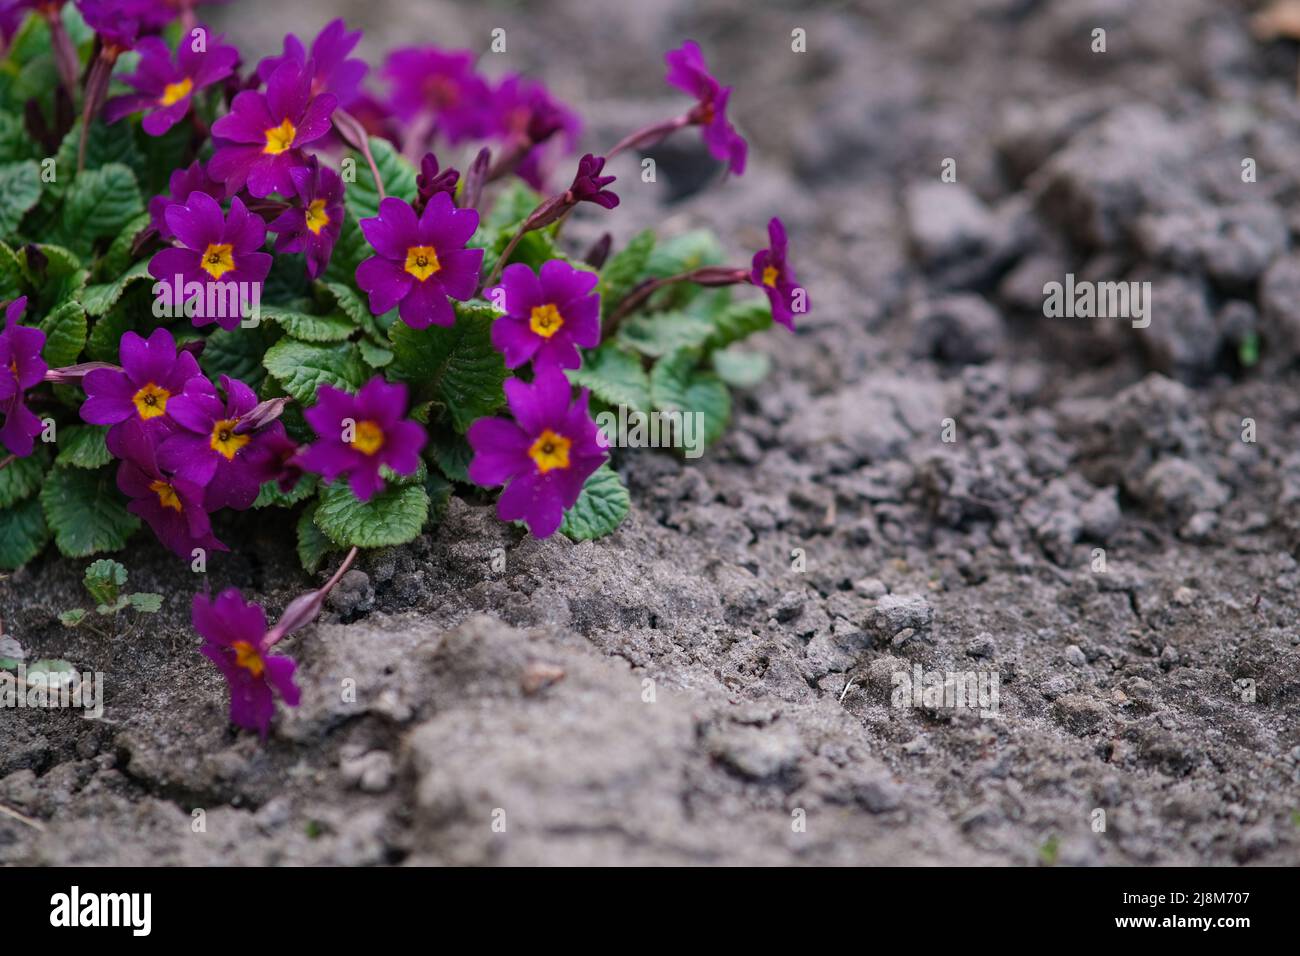 Small flowers with a yellow center and thick dark green leaves surrounded by dry soil. Stock Photo